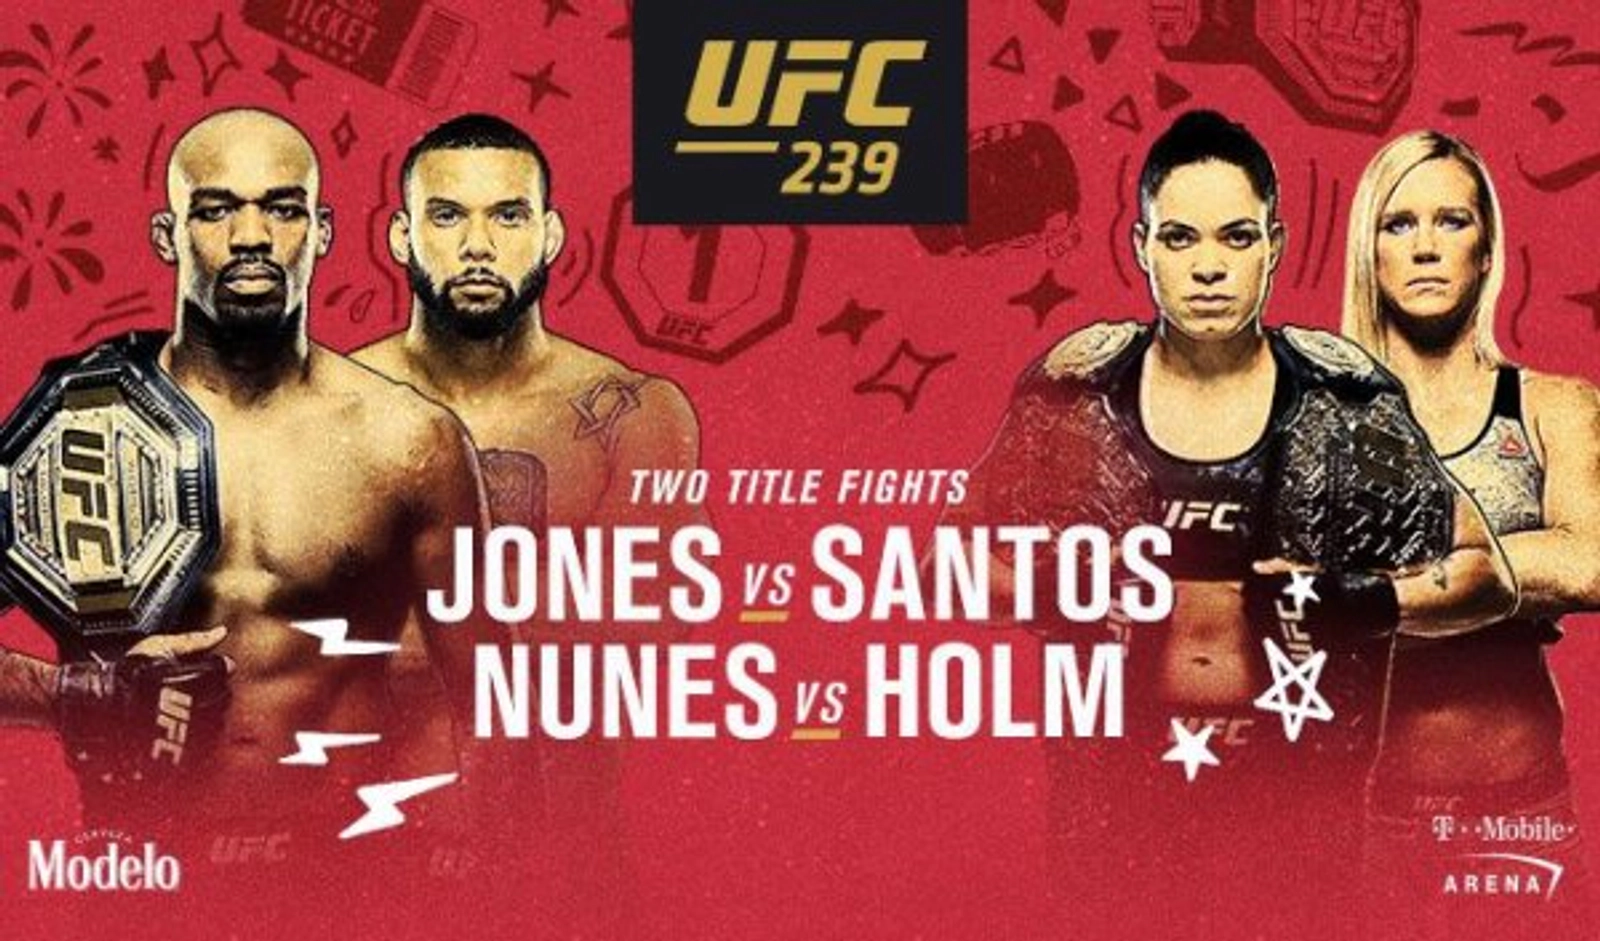  Win A Table At Dave & Buster's For UFC 239  - Thumbnail Image